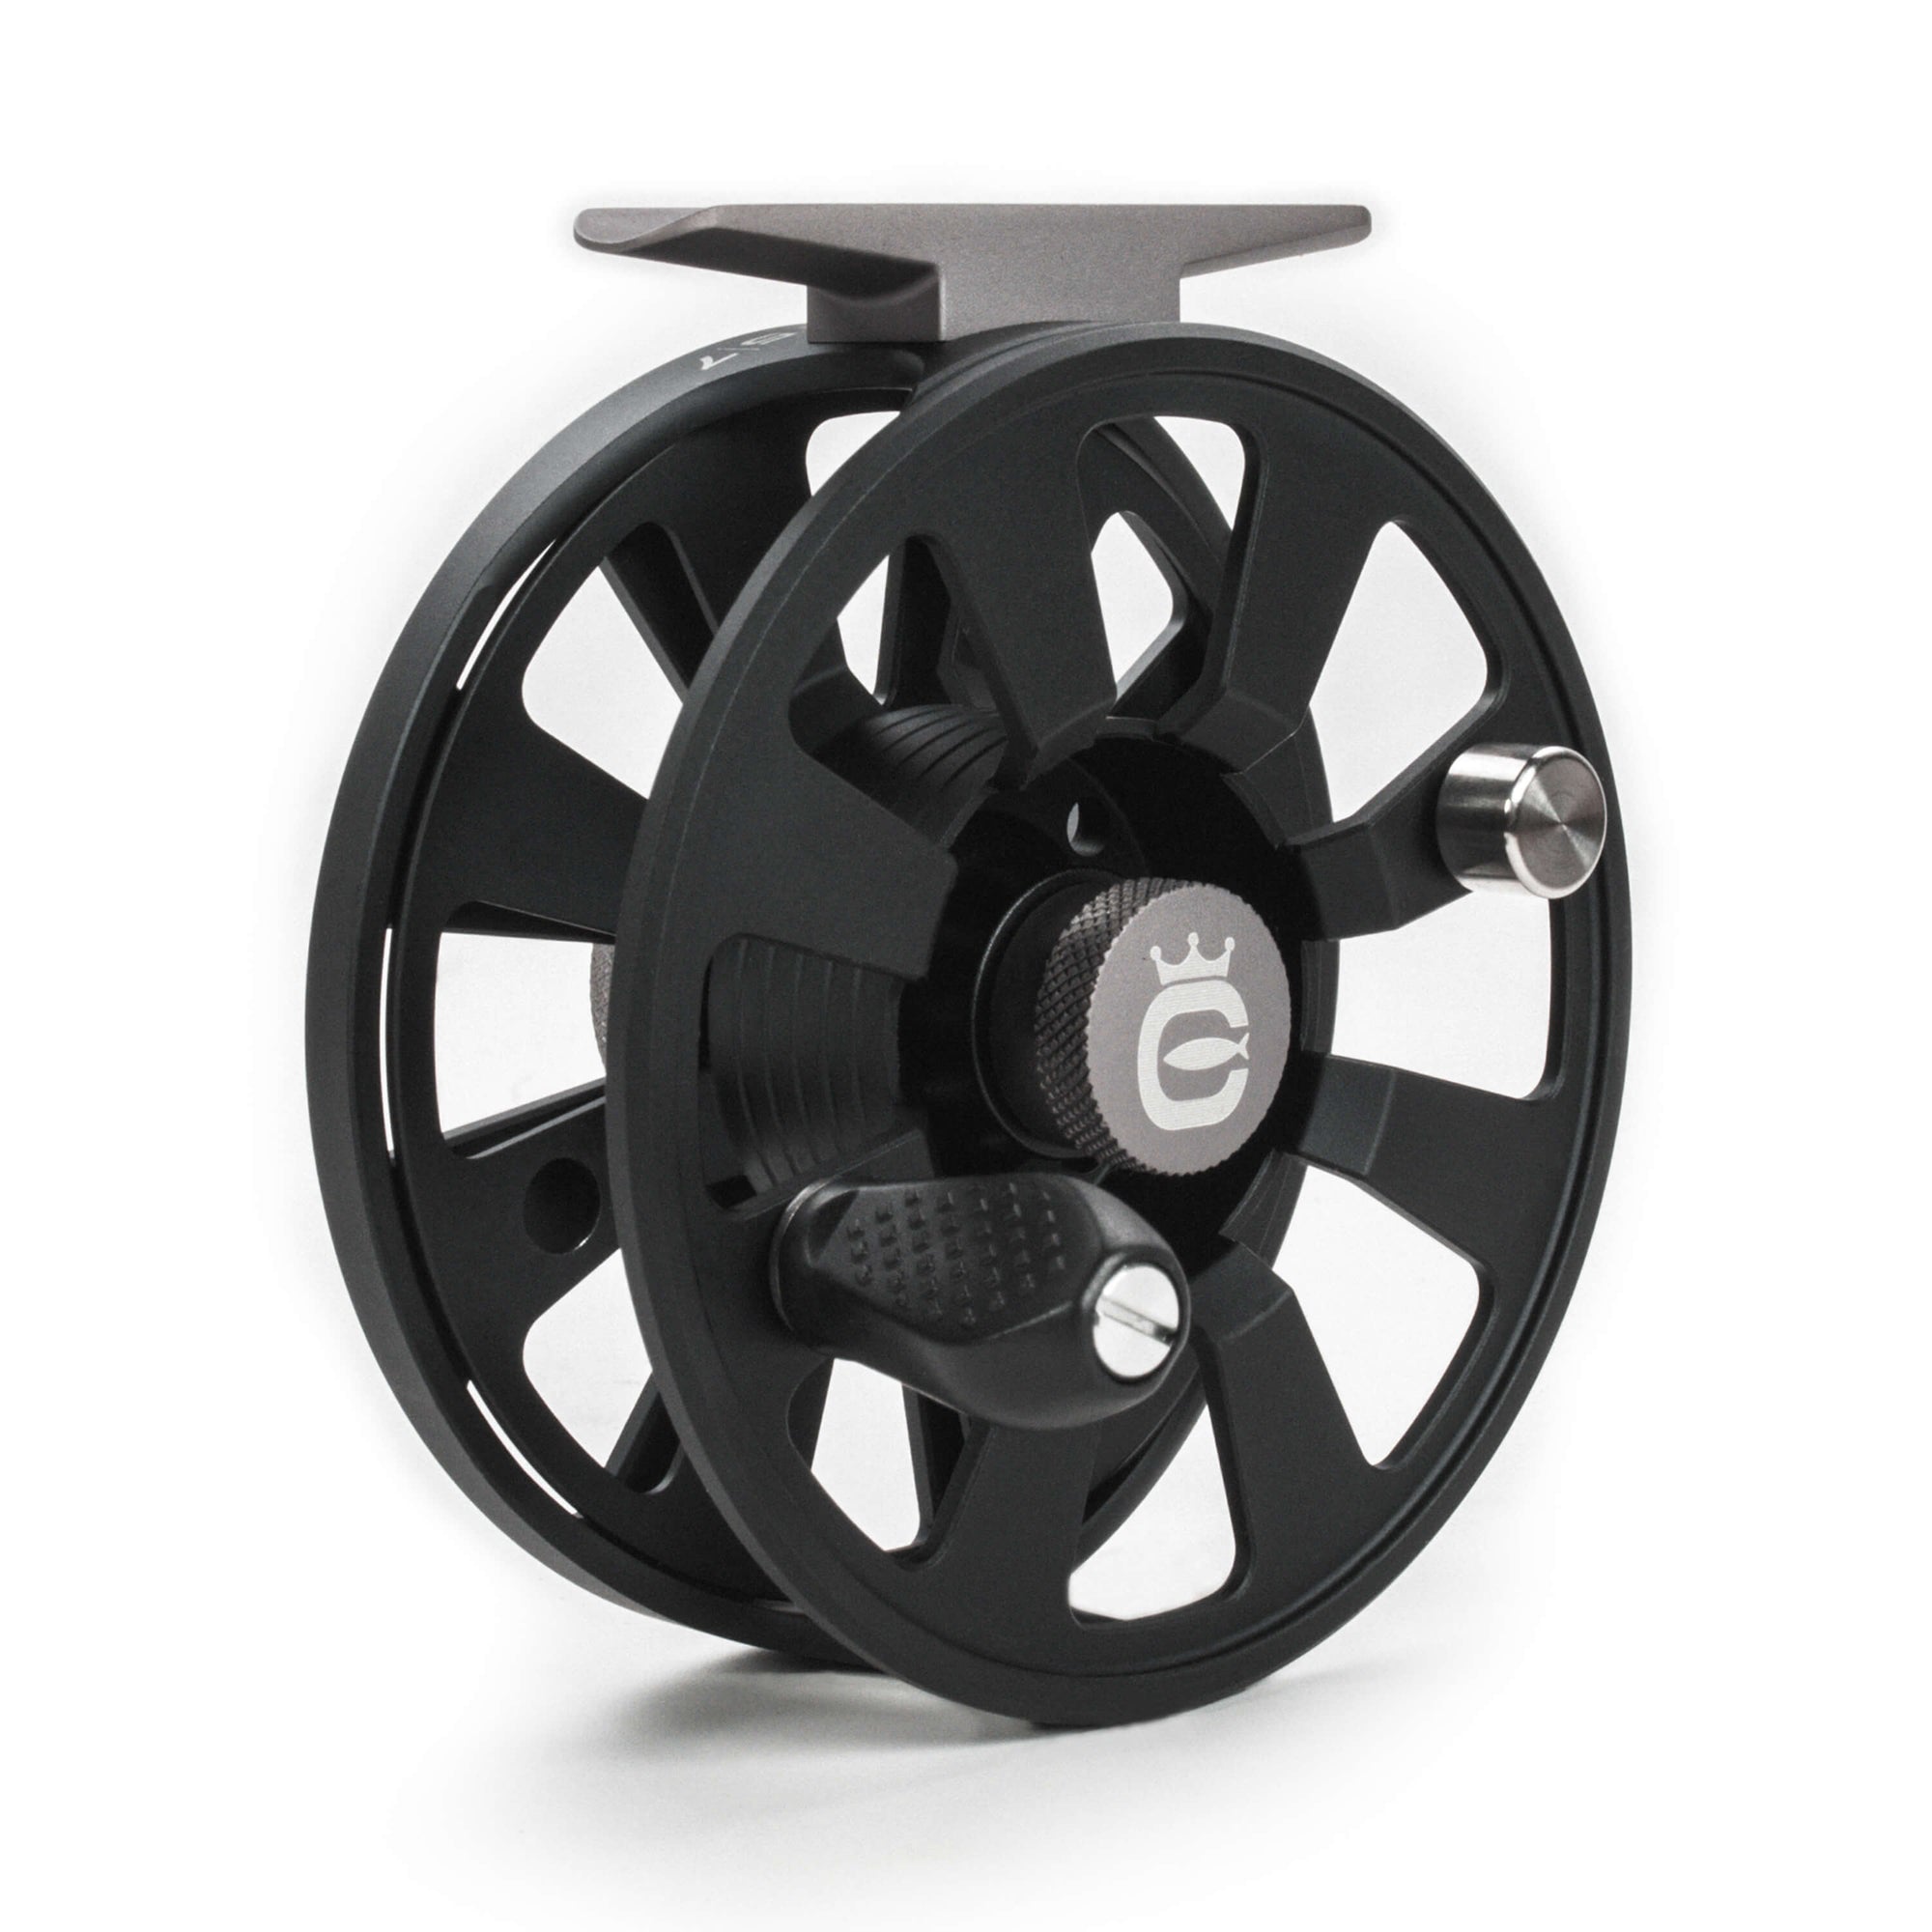 PERFORMANCE REELS For 3 to 7 Weight Line